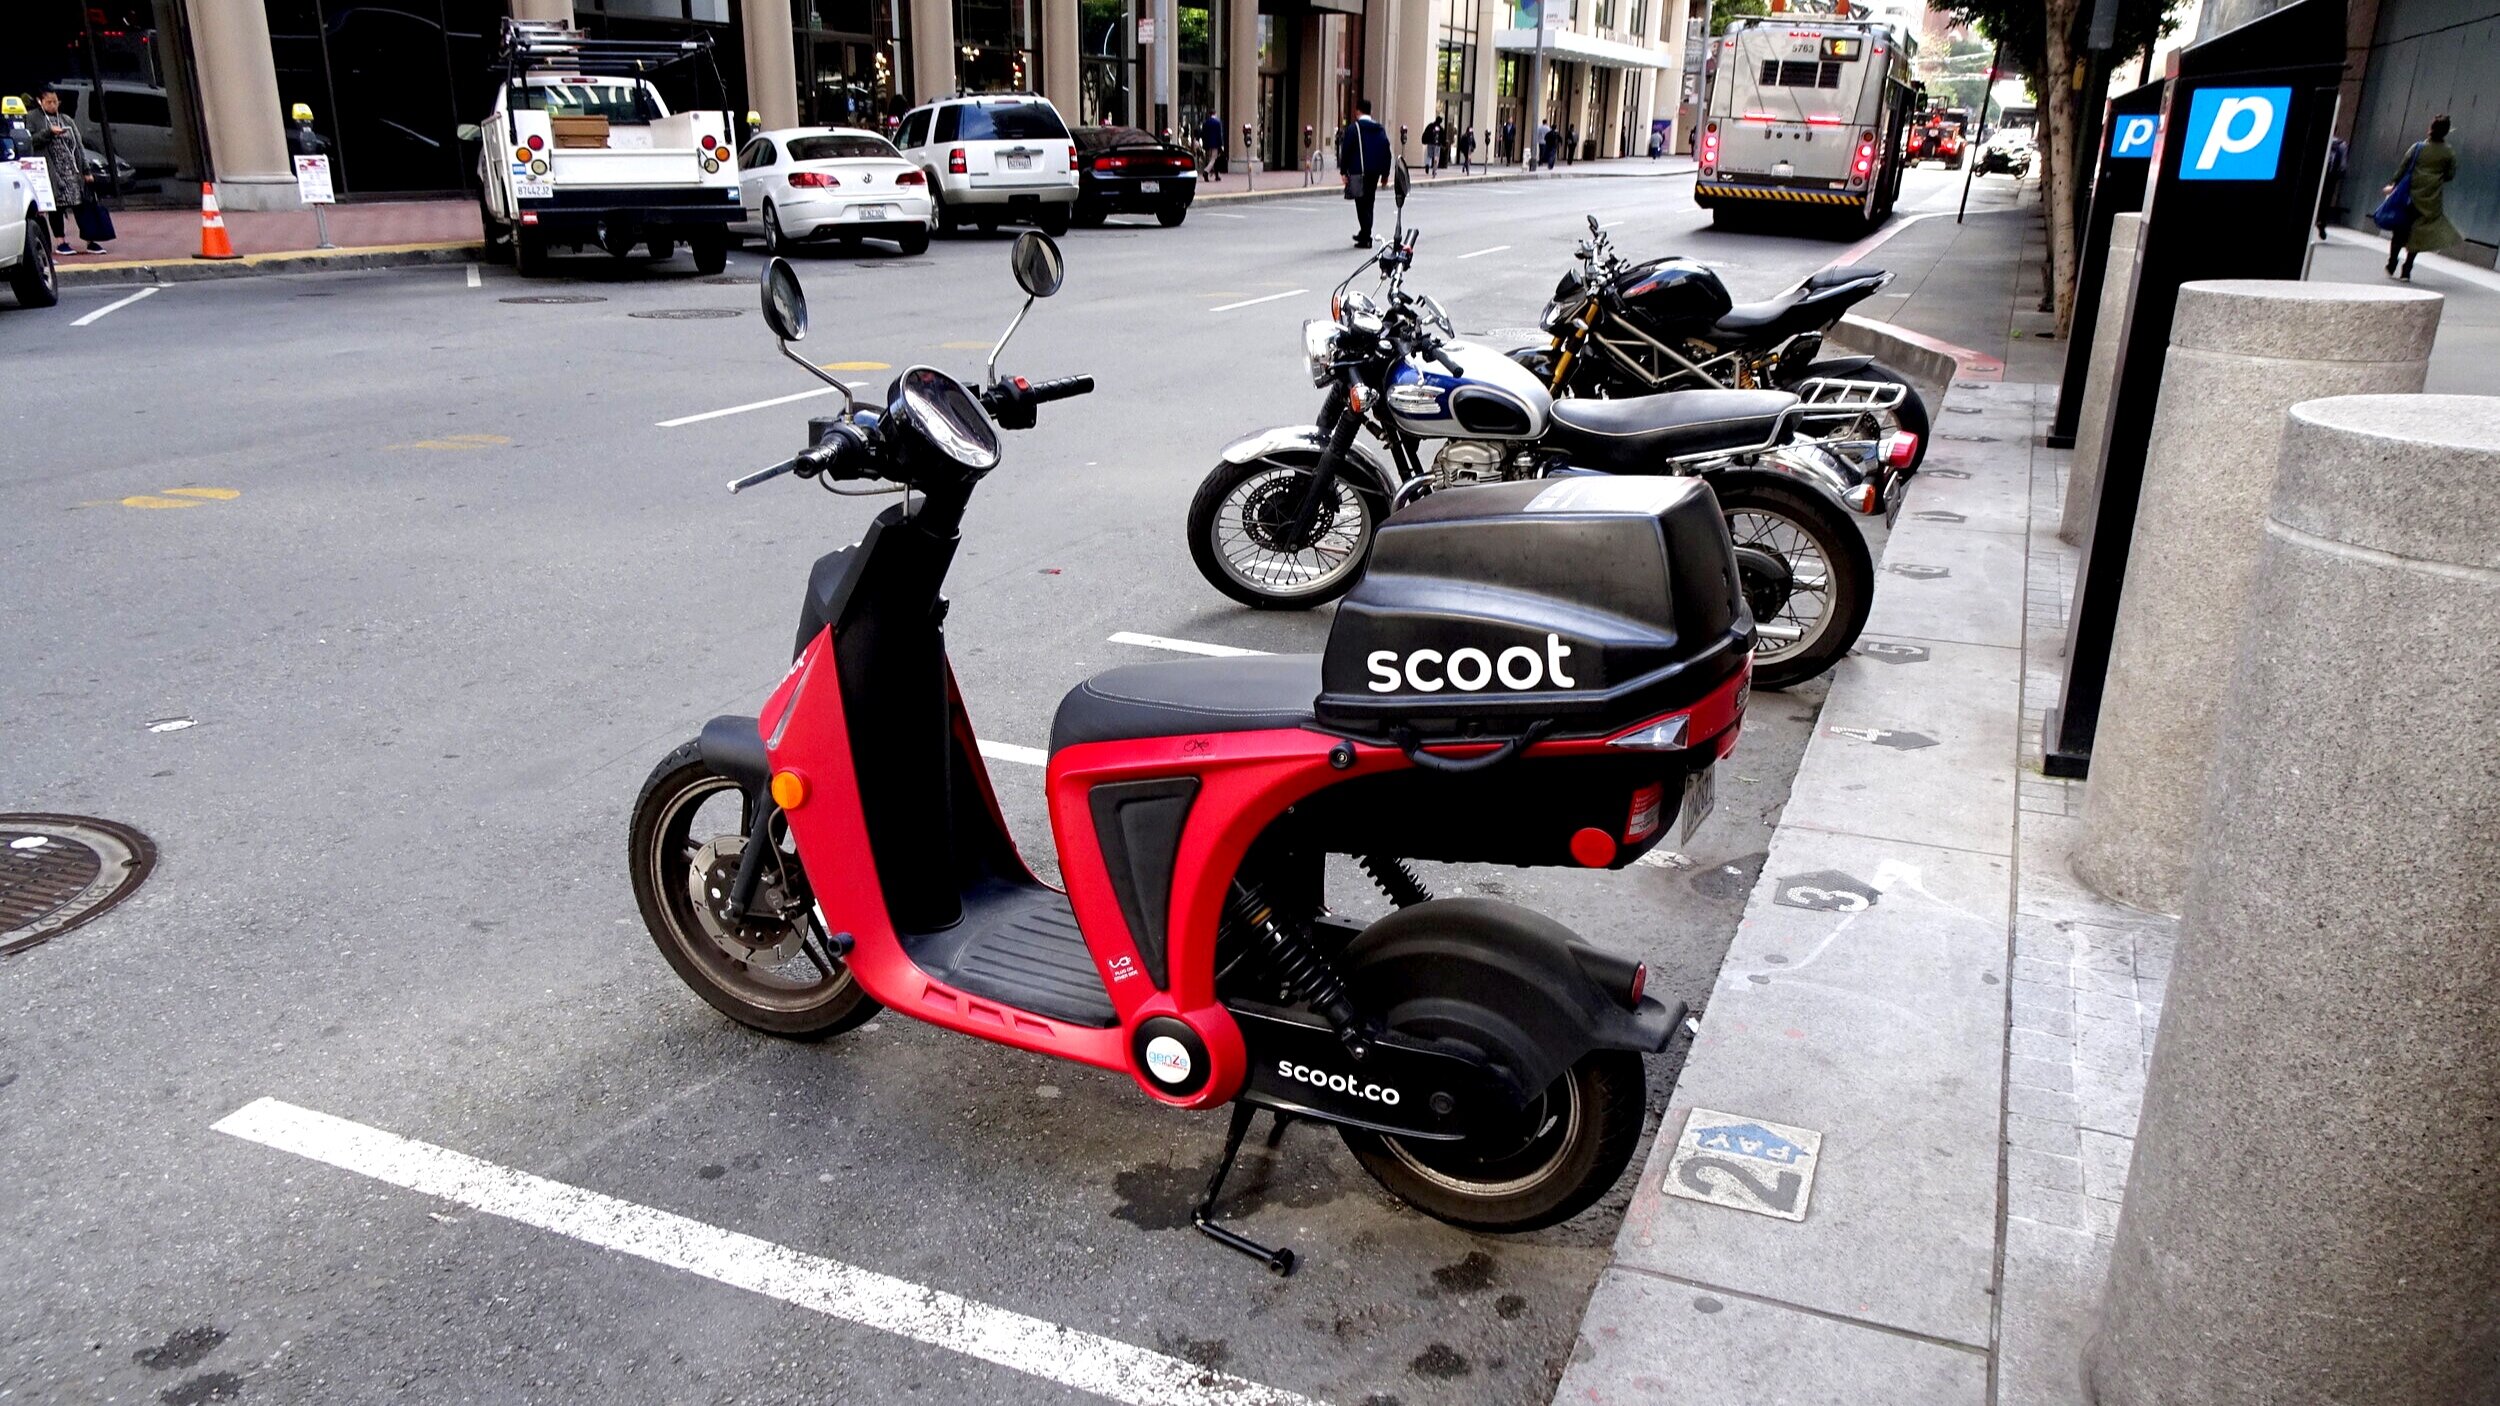 Scoot Mopeds and Scooters in San — Tunnel Time